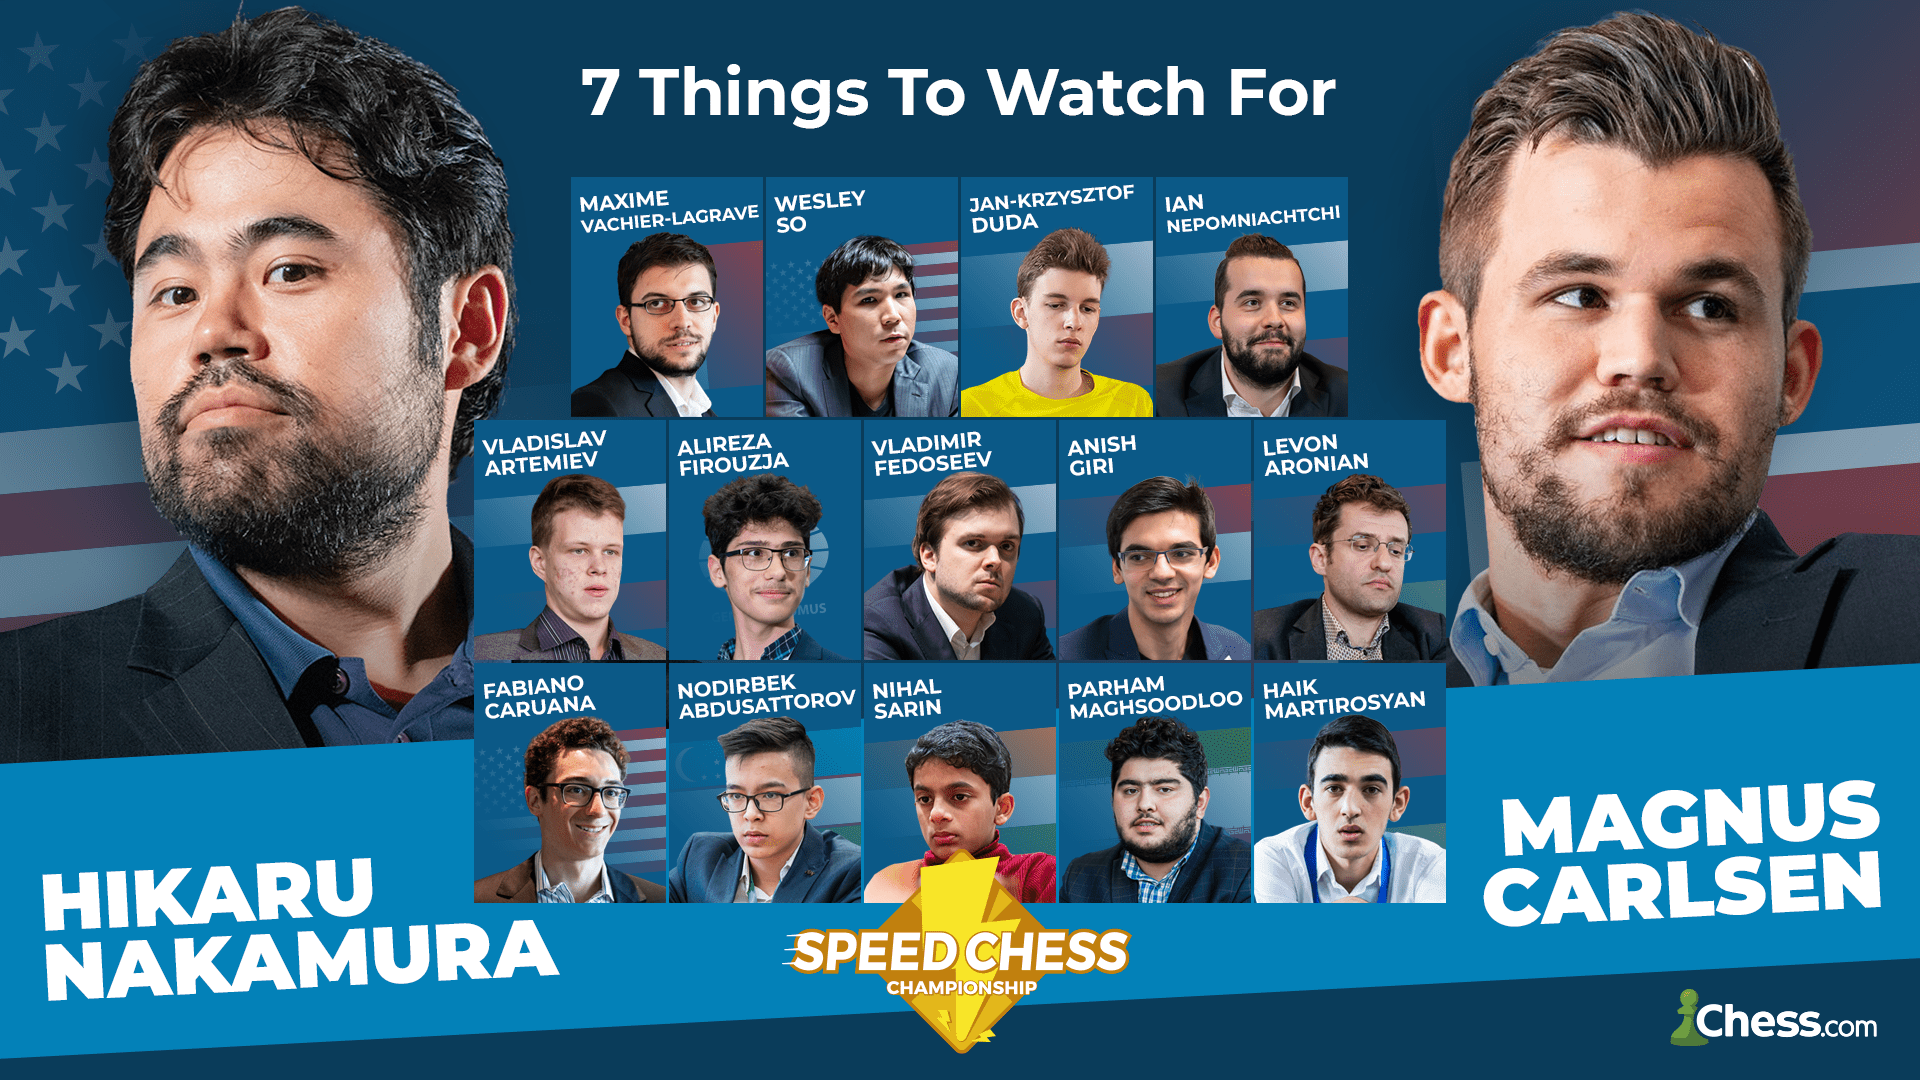 Speed Chess Championship 7 Things To Watch For